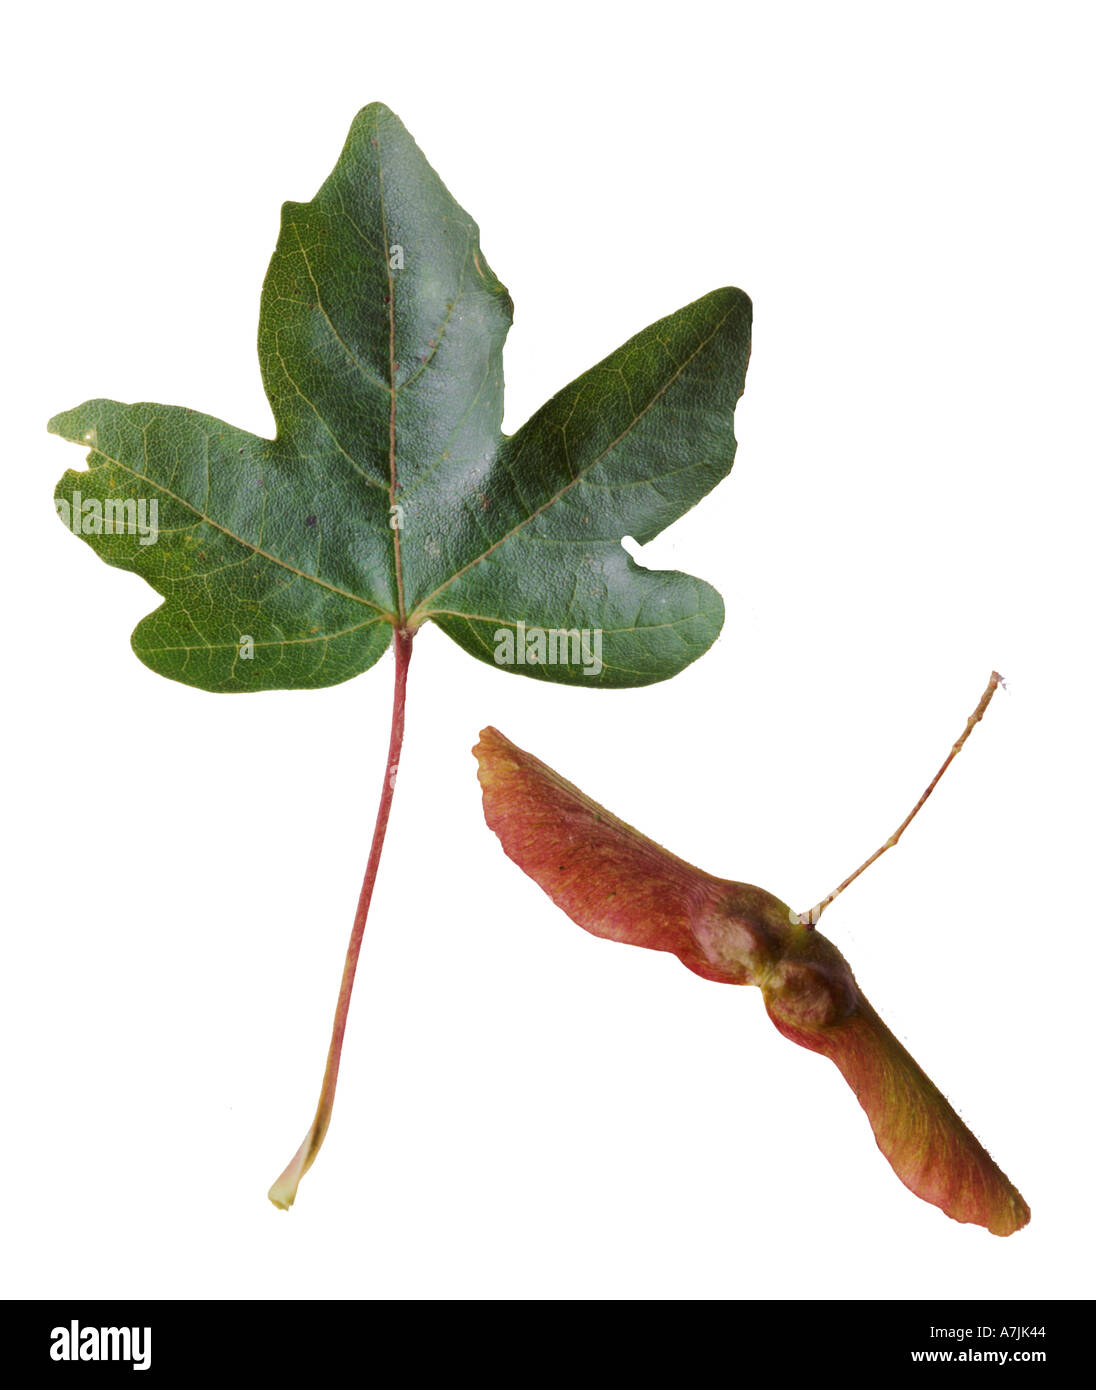 Sycamore Acer pseudoplatanus Leaf and winged seed or fruit Surrey England Stock Photo